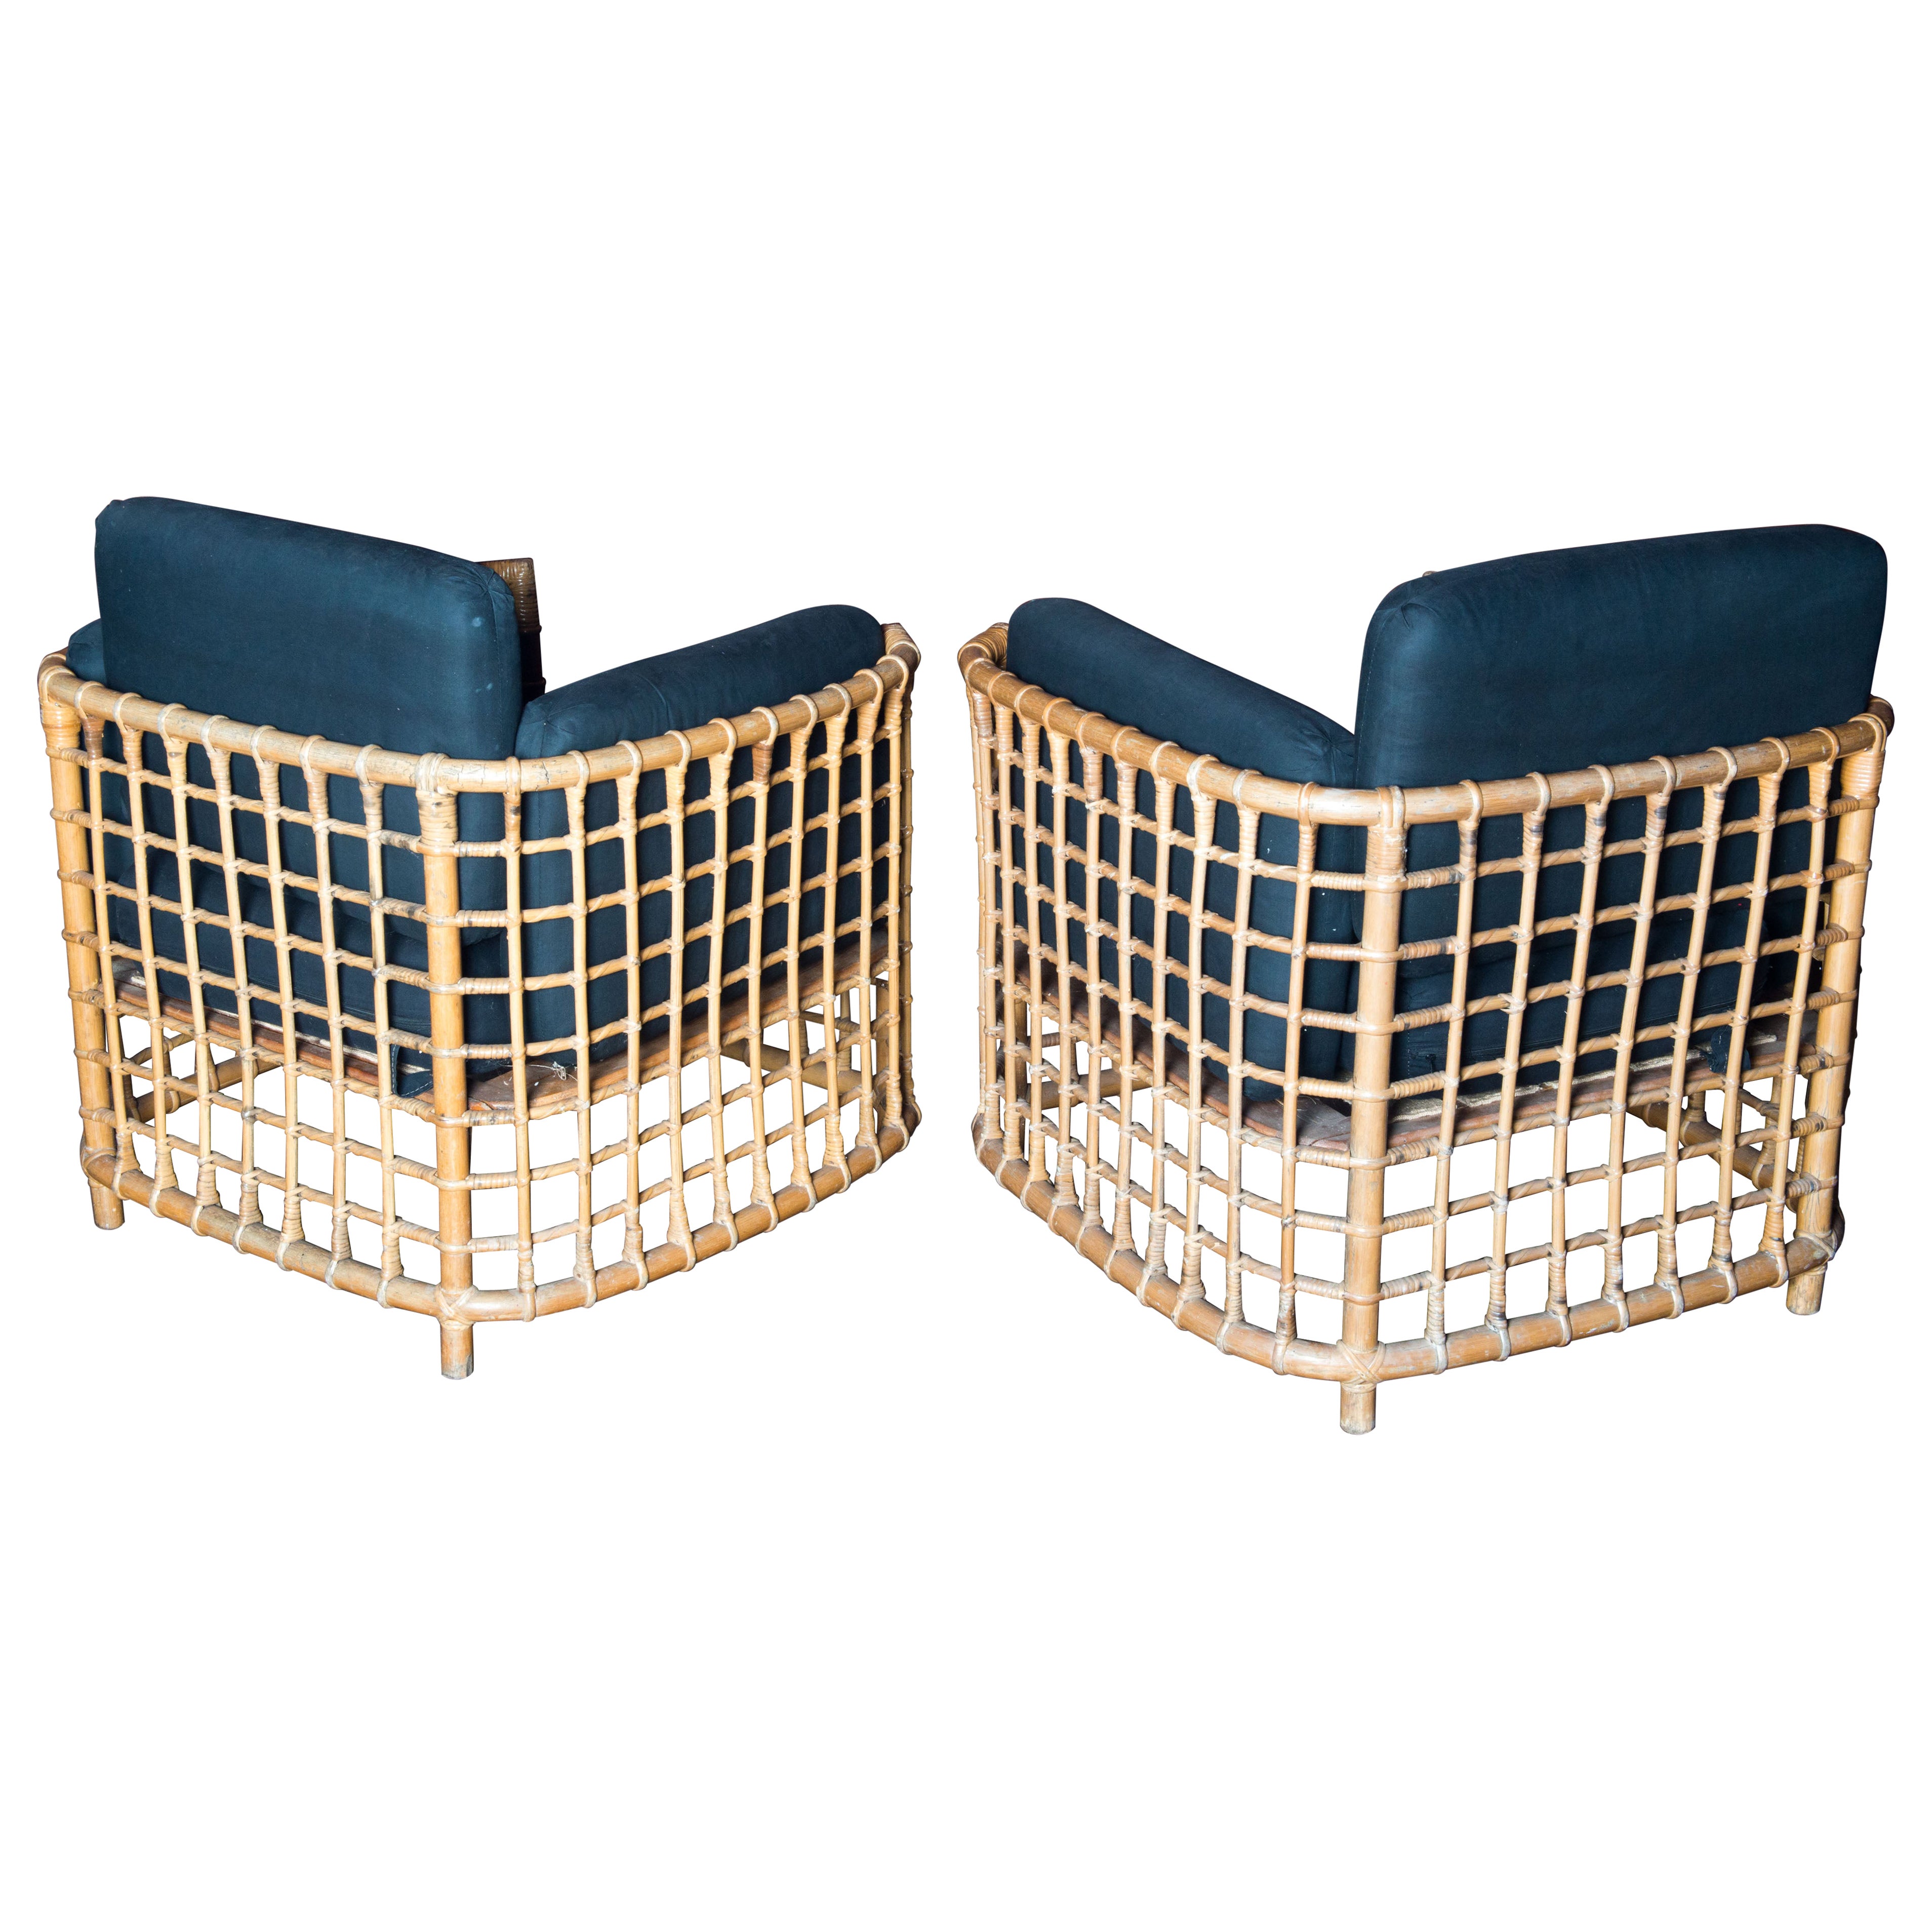 Henry Olko Pair of Mid-Century Modern Square Series Rattan Armchairs For Sale